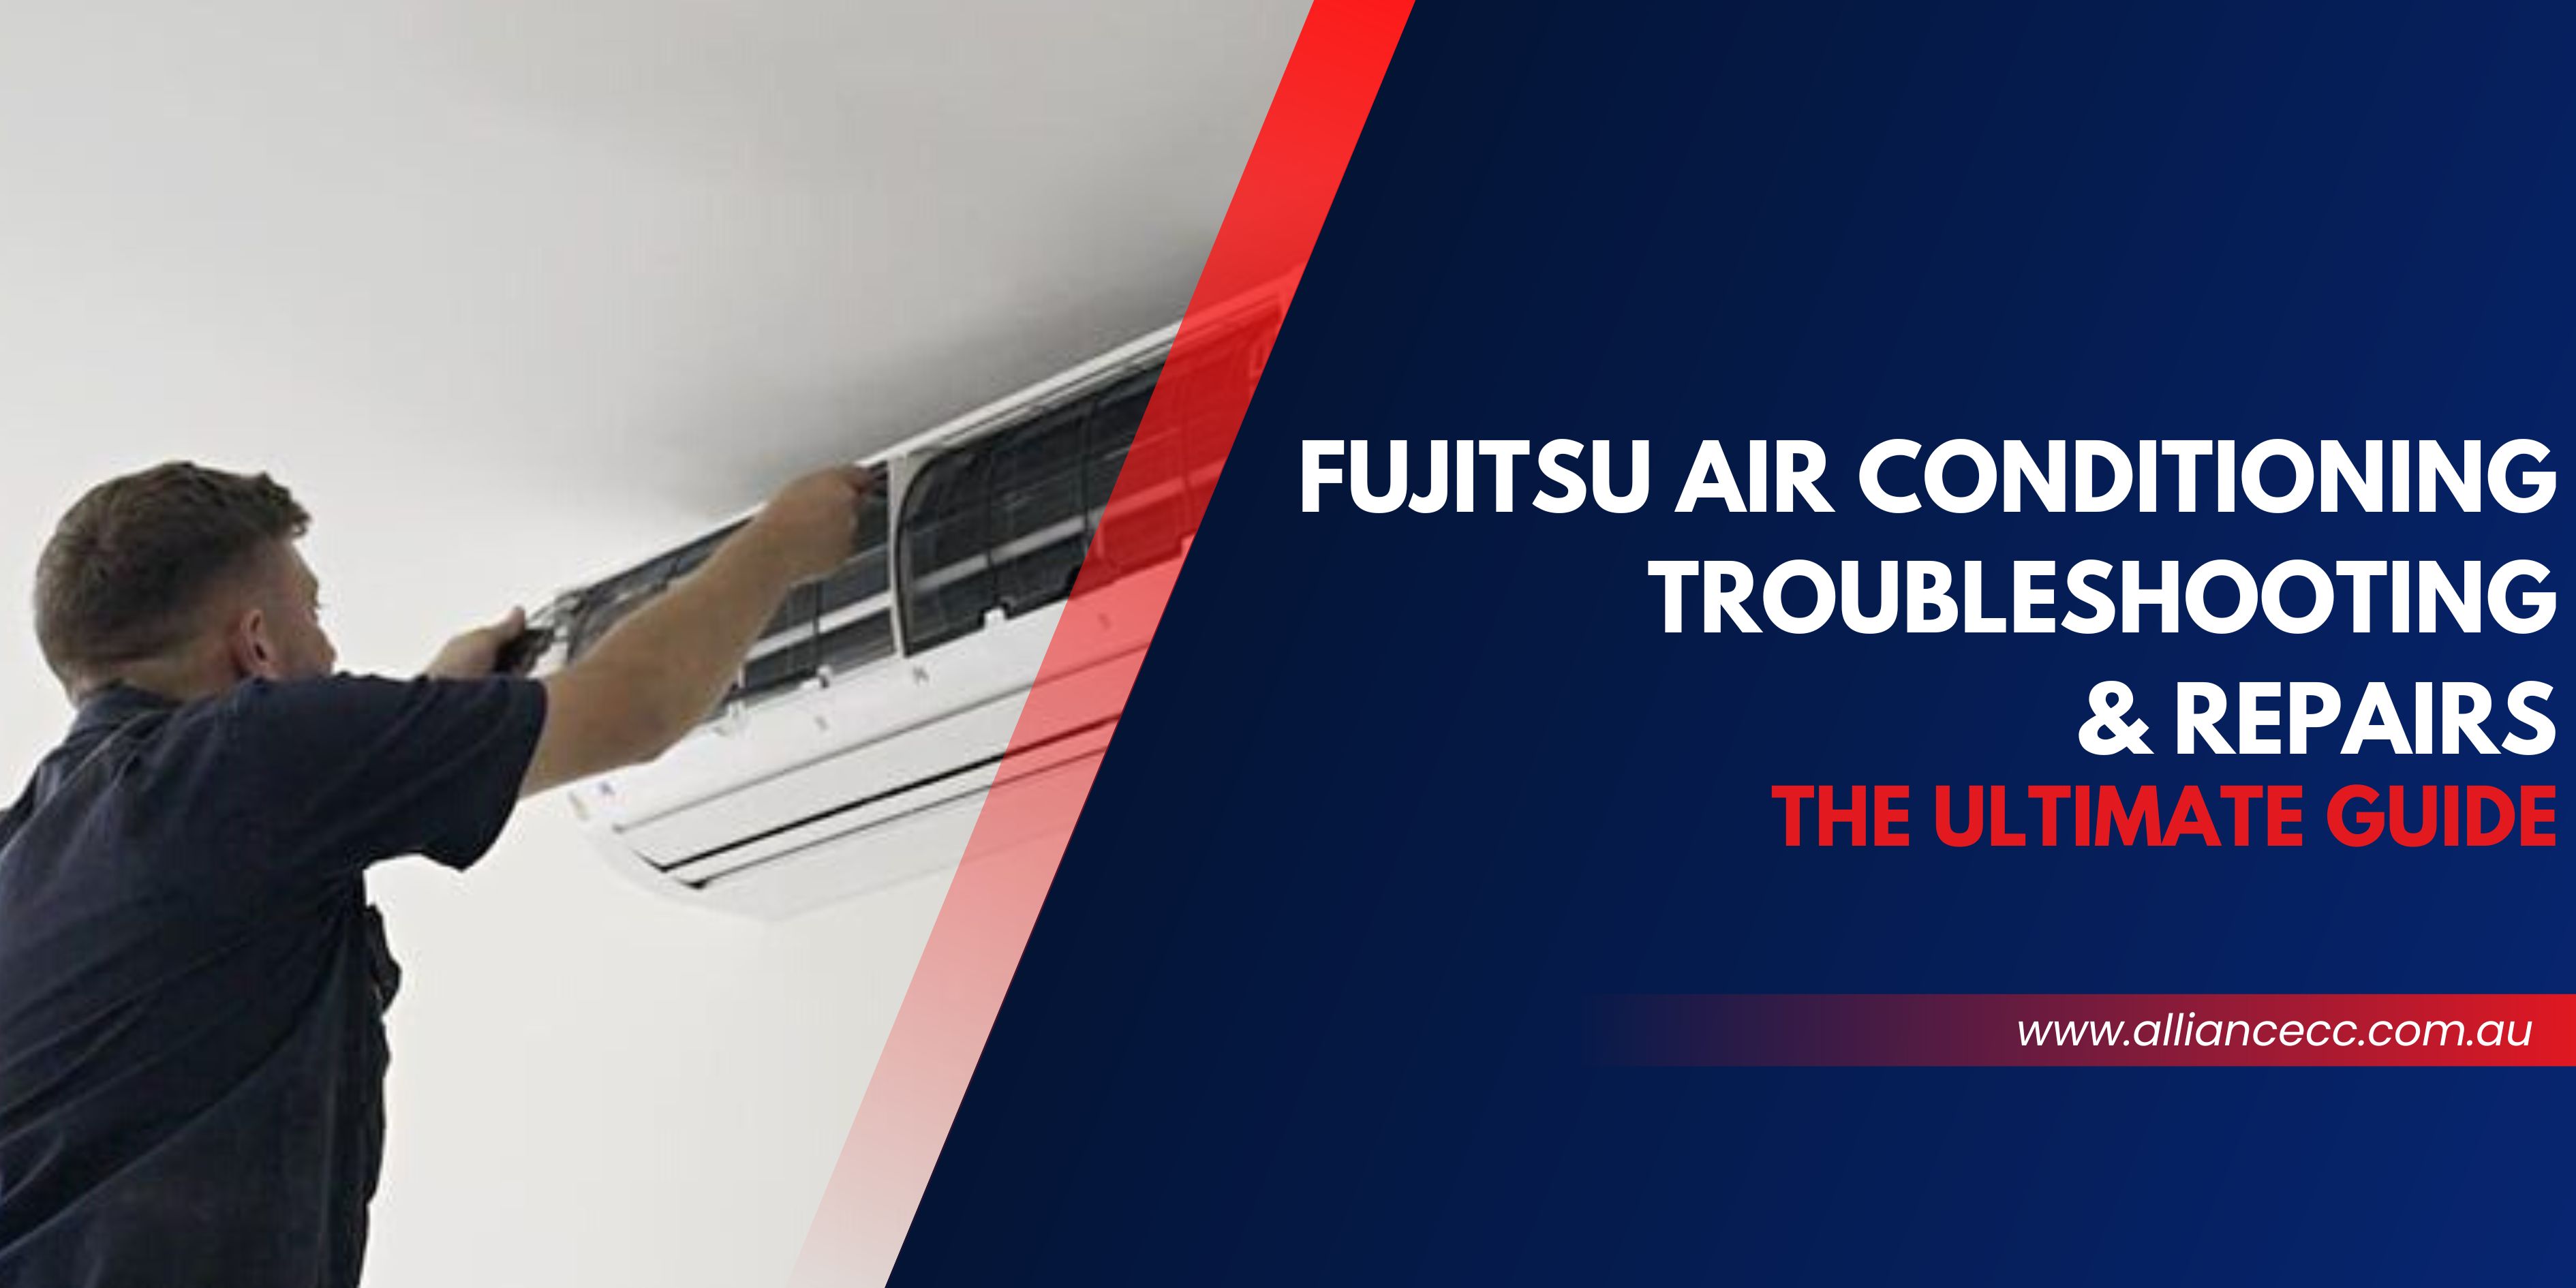 How to Reset Fujitsu Air Conditioner: Quick and Easy Steps